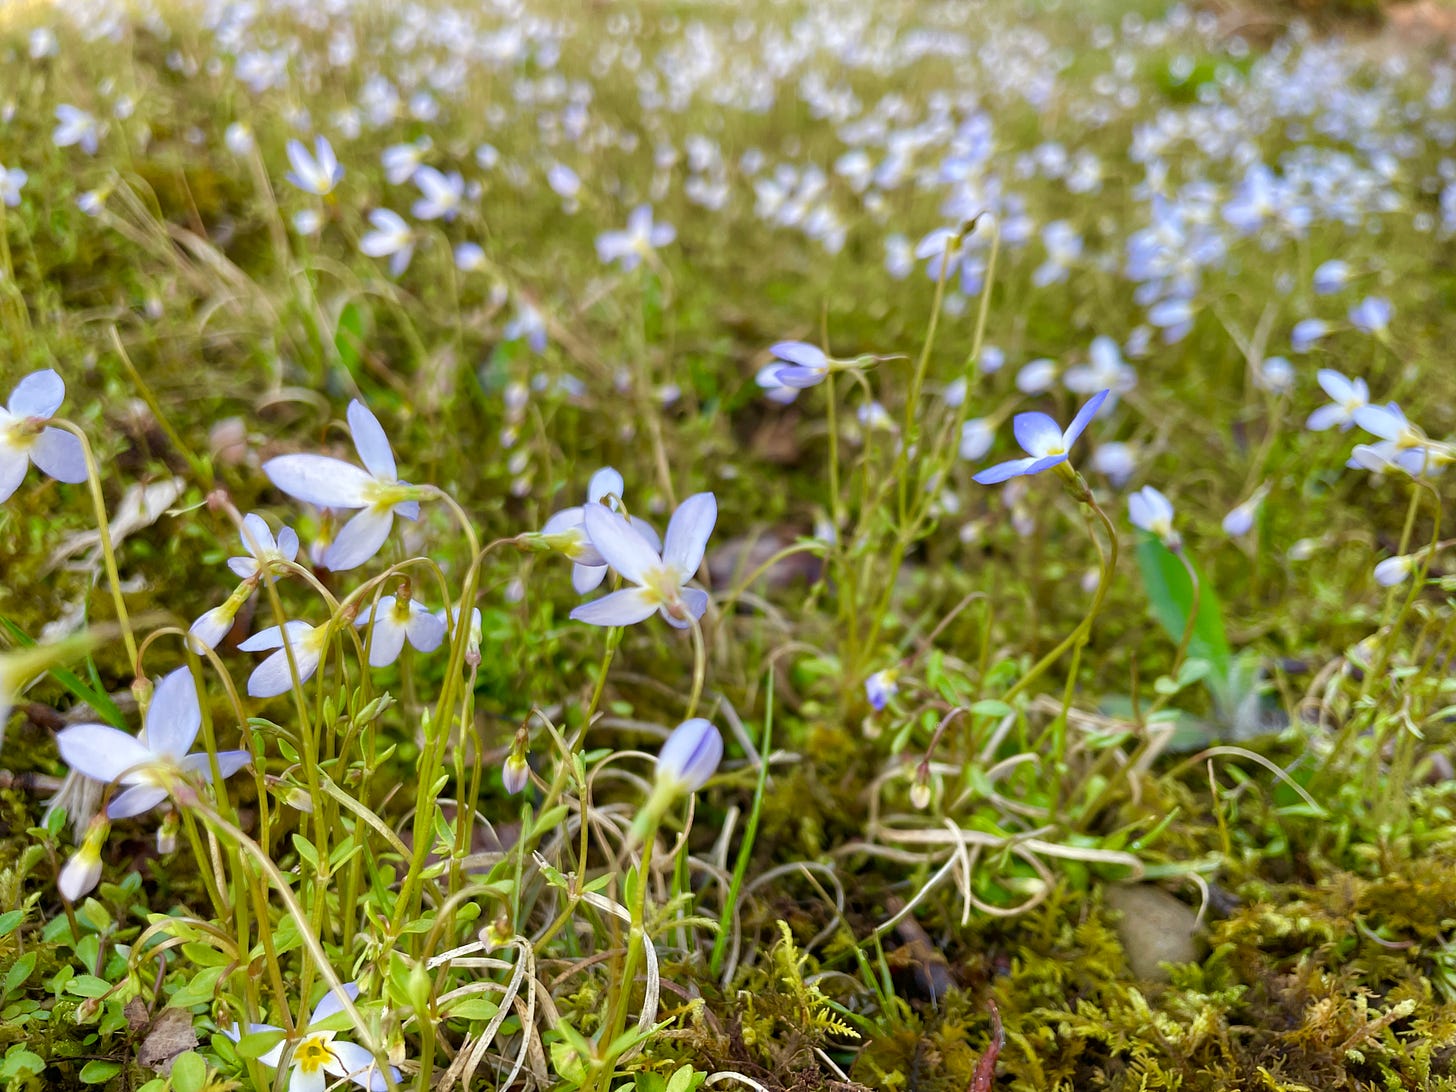 The Bluets (Houstonia caerulea) in the moss are just getting going this week. There is a nice carpet here so more to come! 